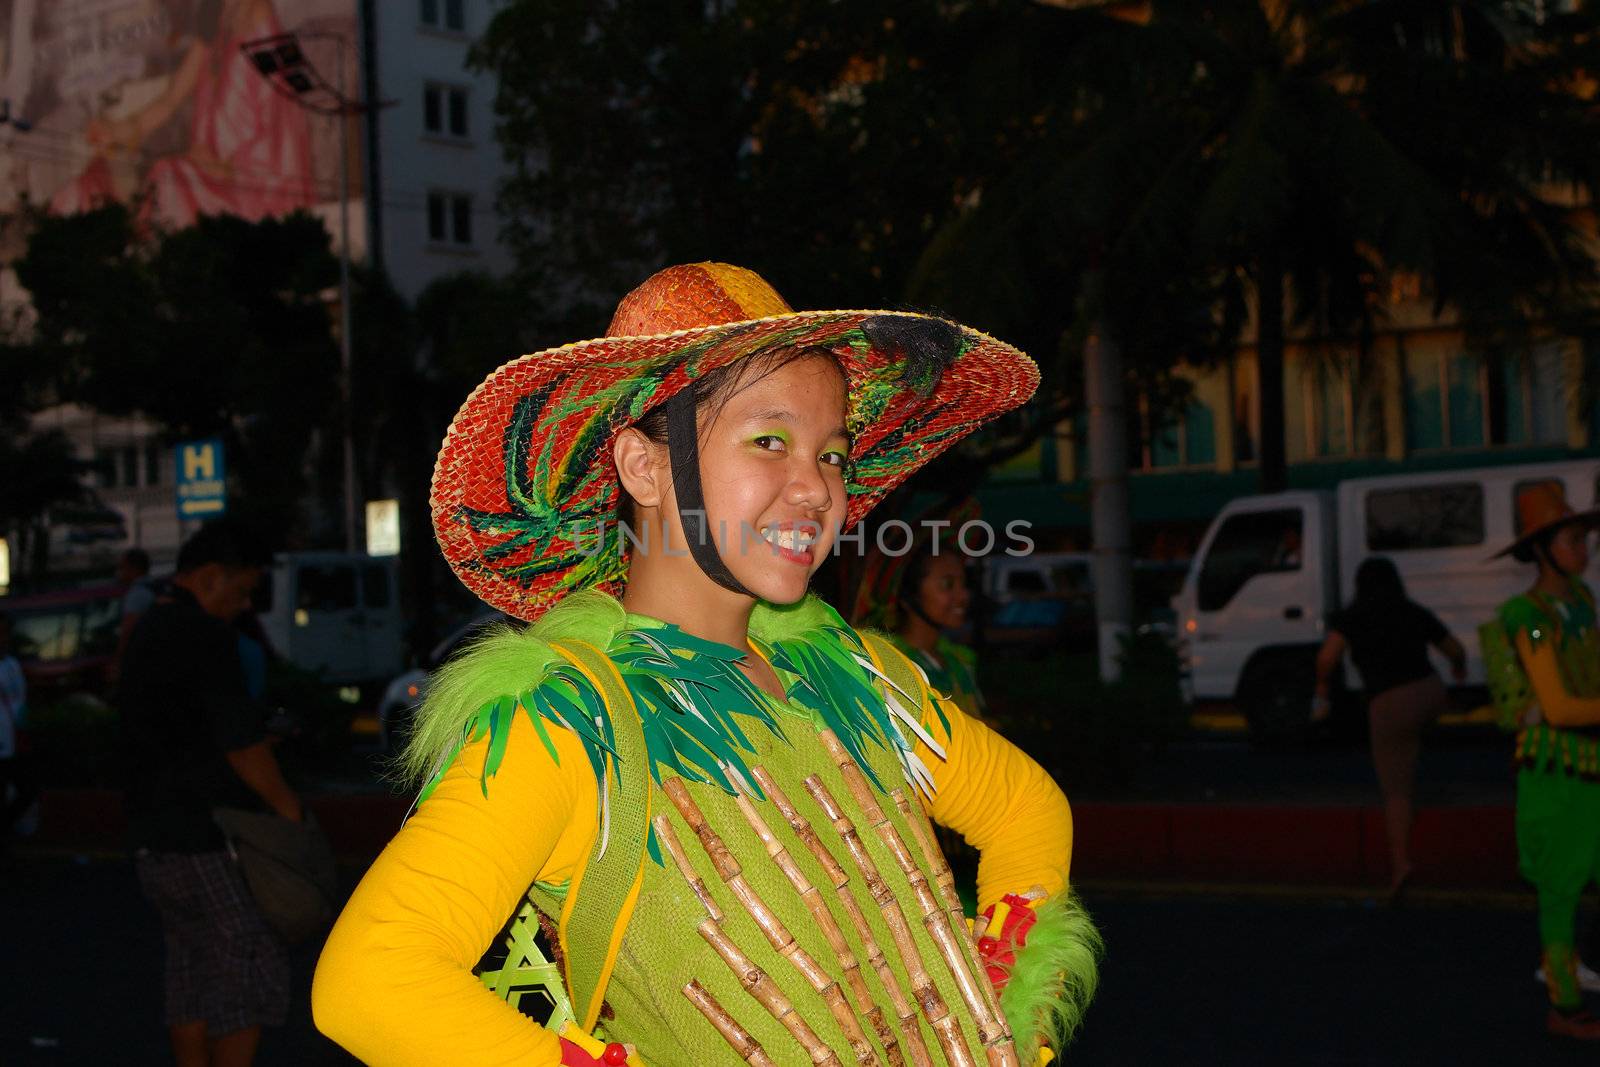 MANILA, PHILIPPINES - APR. 14: girl participant in her cultural dress pauses during Aliwan Fiesta, which is the biggest annual national festival competition on April 14, 2012 in Manila Philippines.